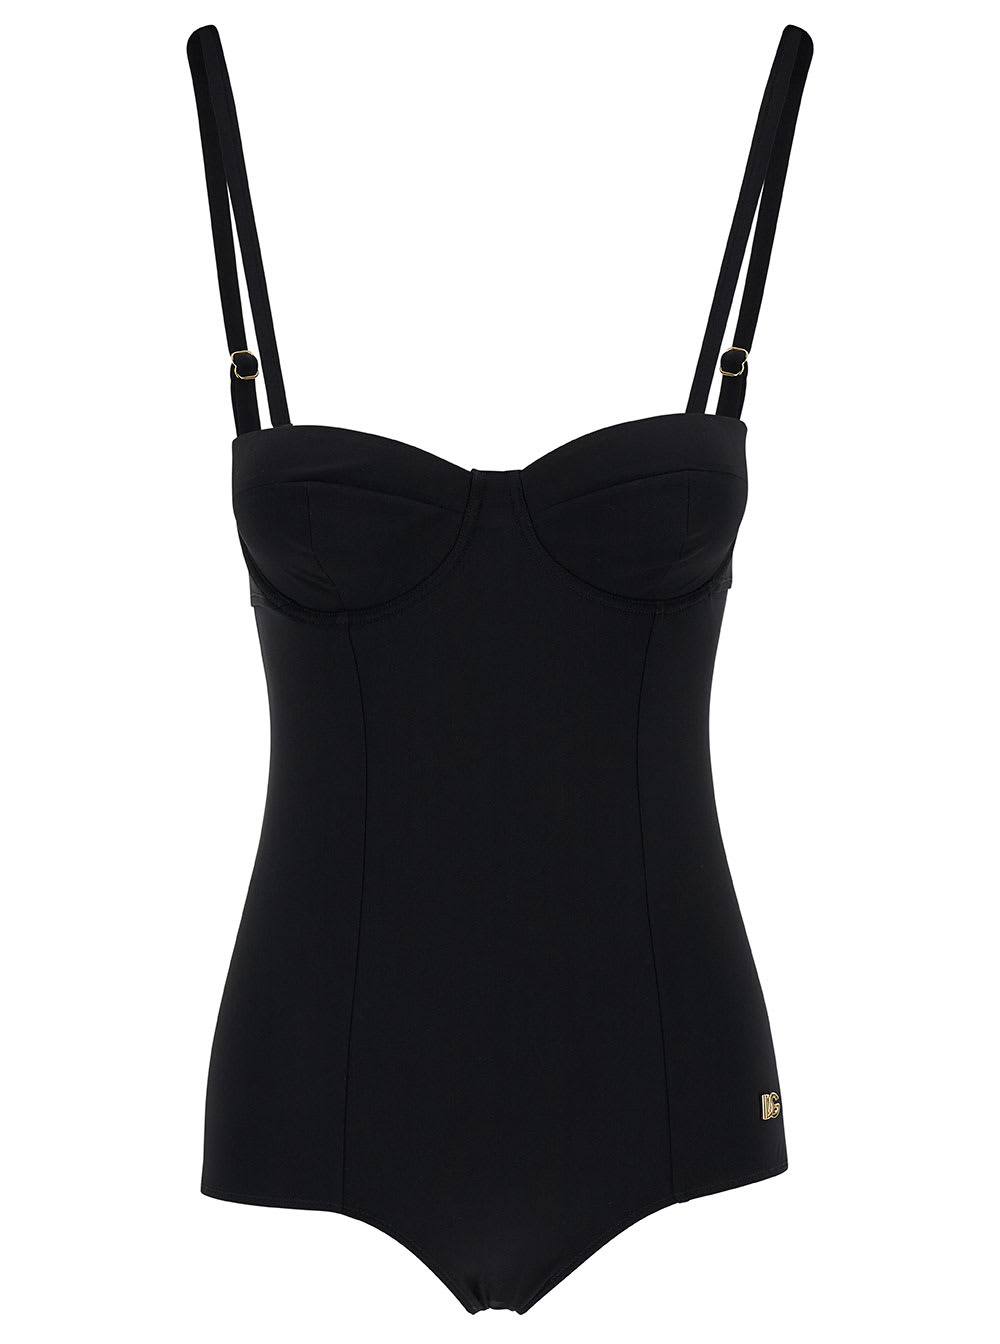 DOLCE & GABBANA BLACK ONE-PIECE SWIMSUIT WITH DG LOGO DETAIL IN STRETCH POLYAMIDE WOMAN